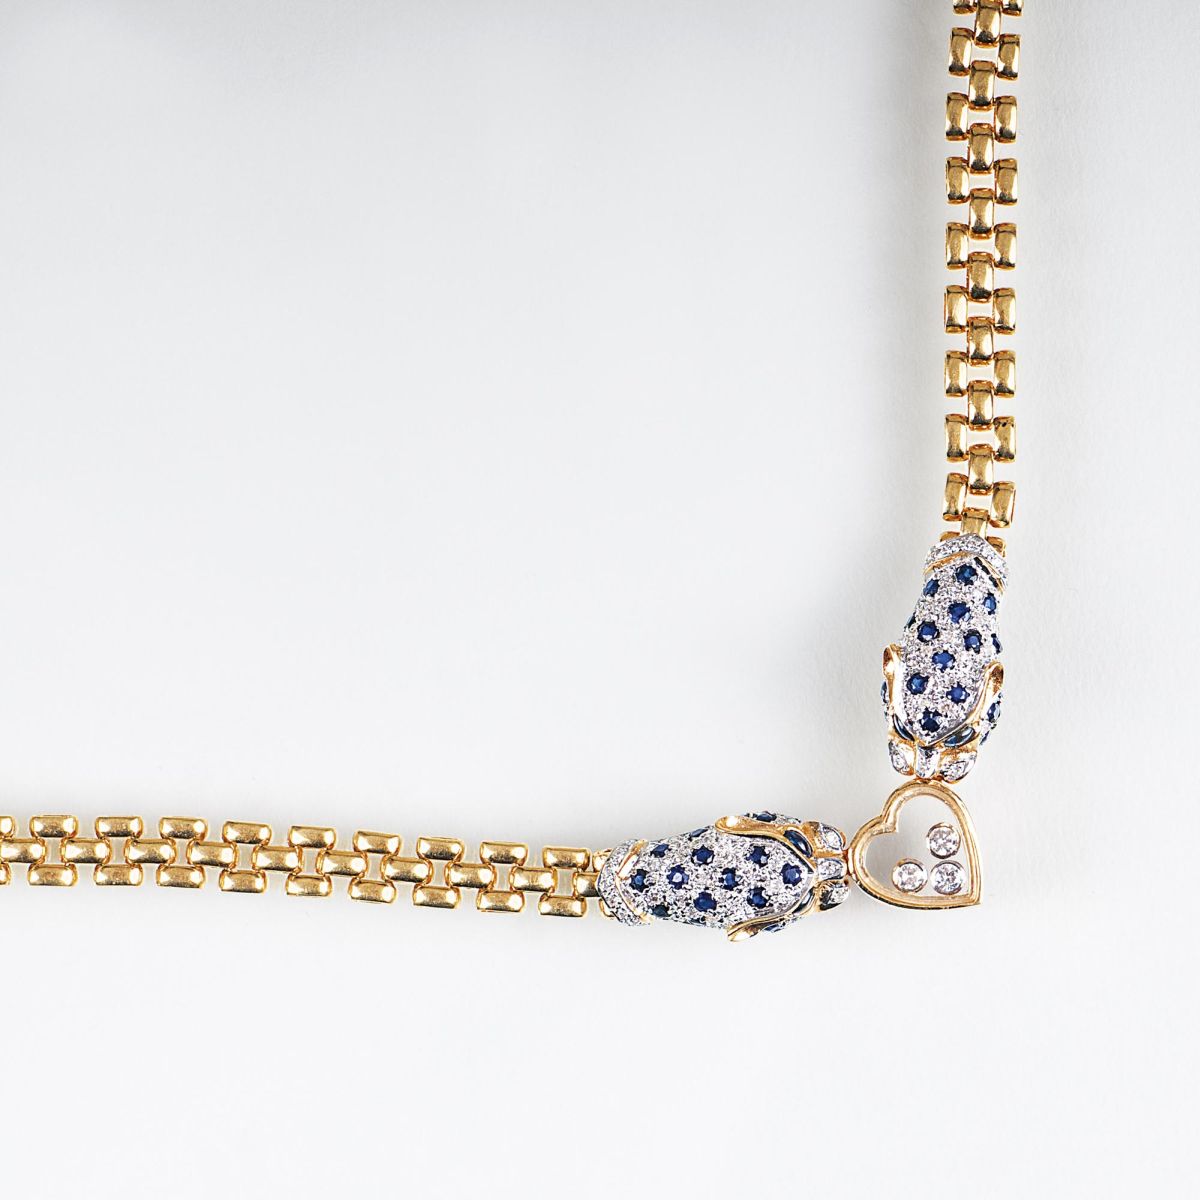 A Sapphire Diamond Necklace with Panther Decor